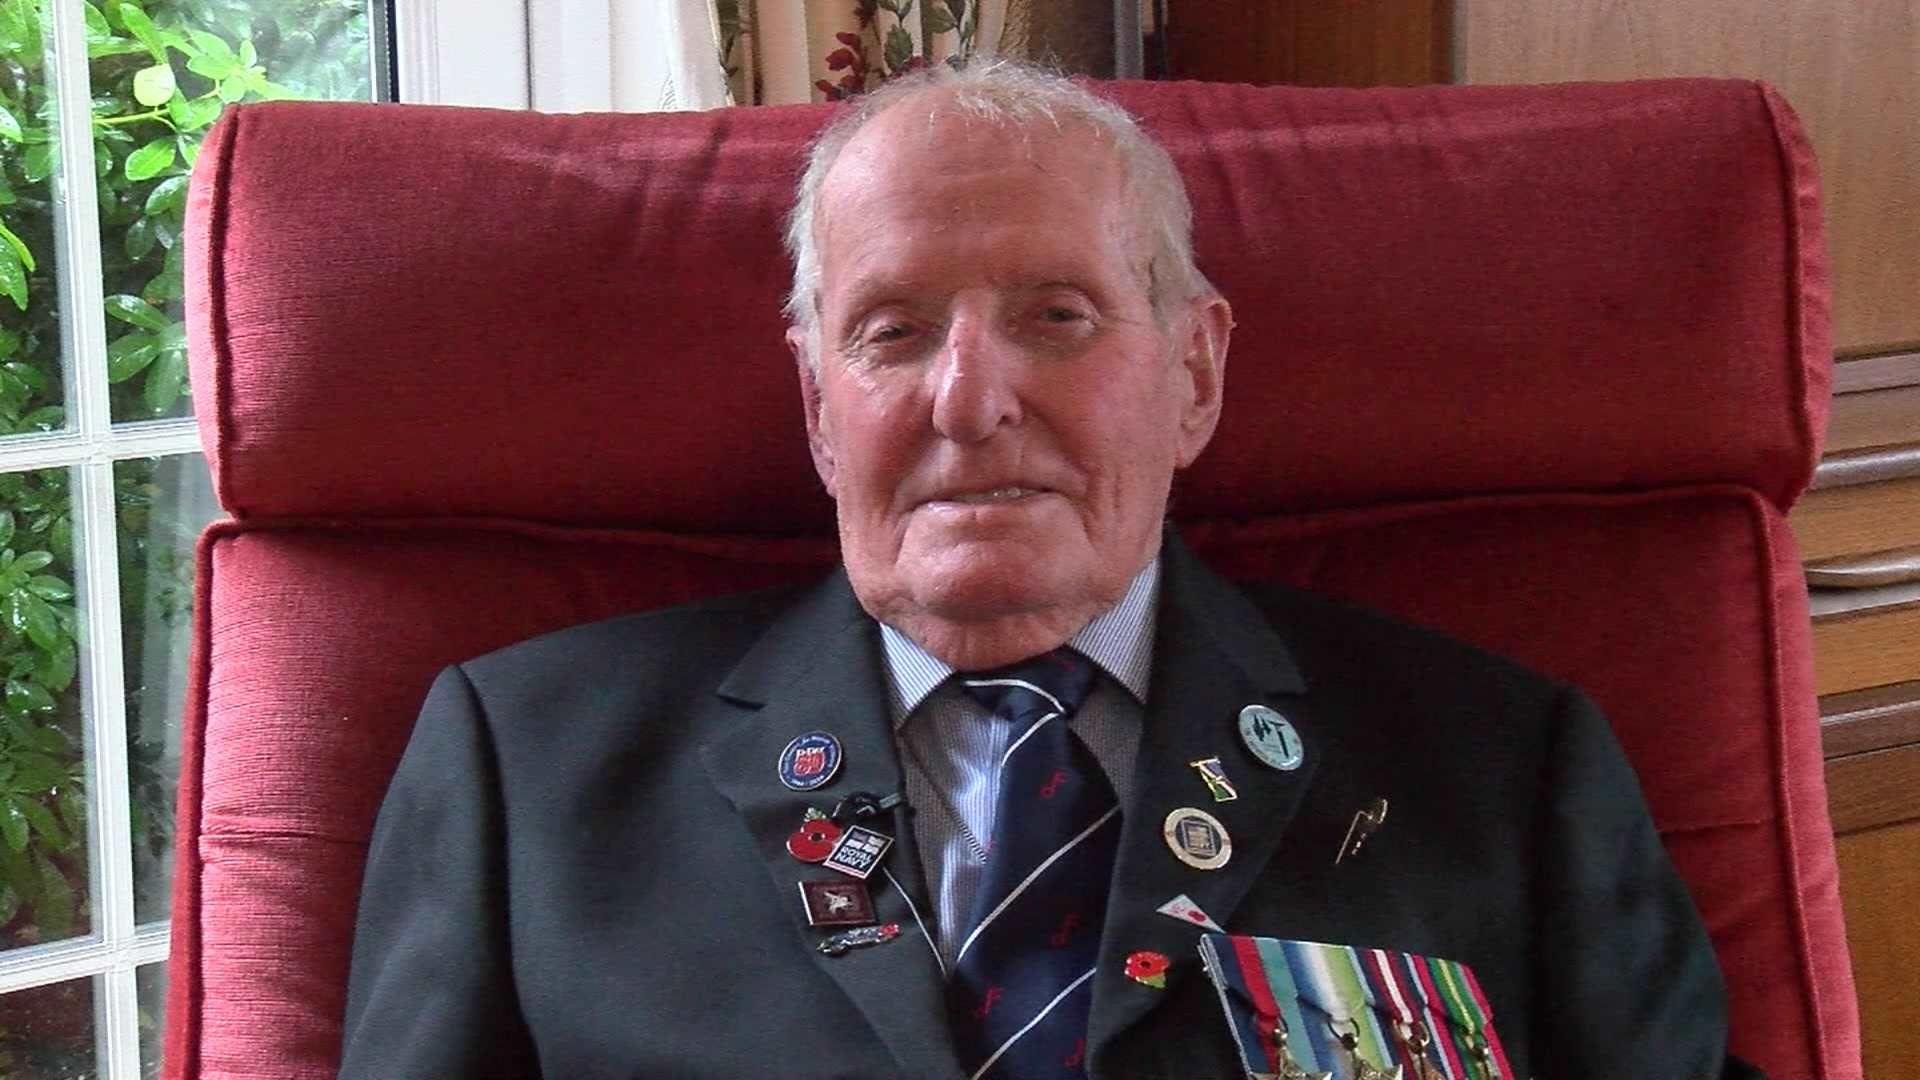 D-Day veteran plans to remember friends in Normandy